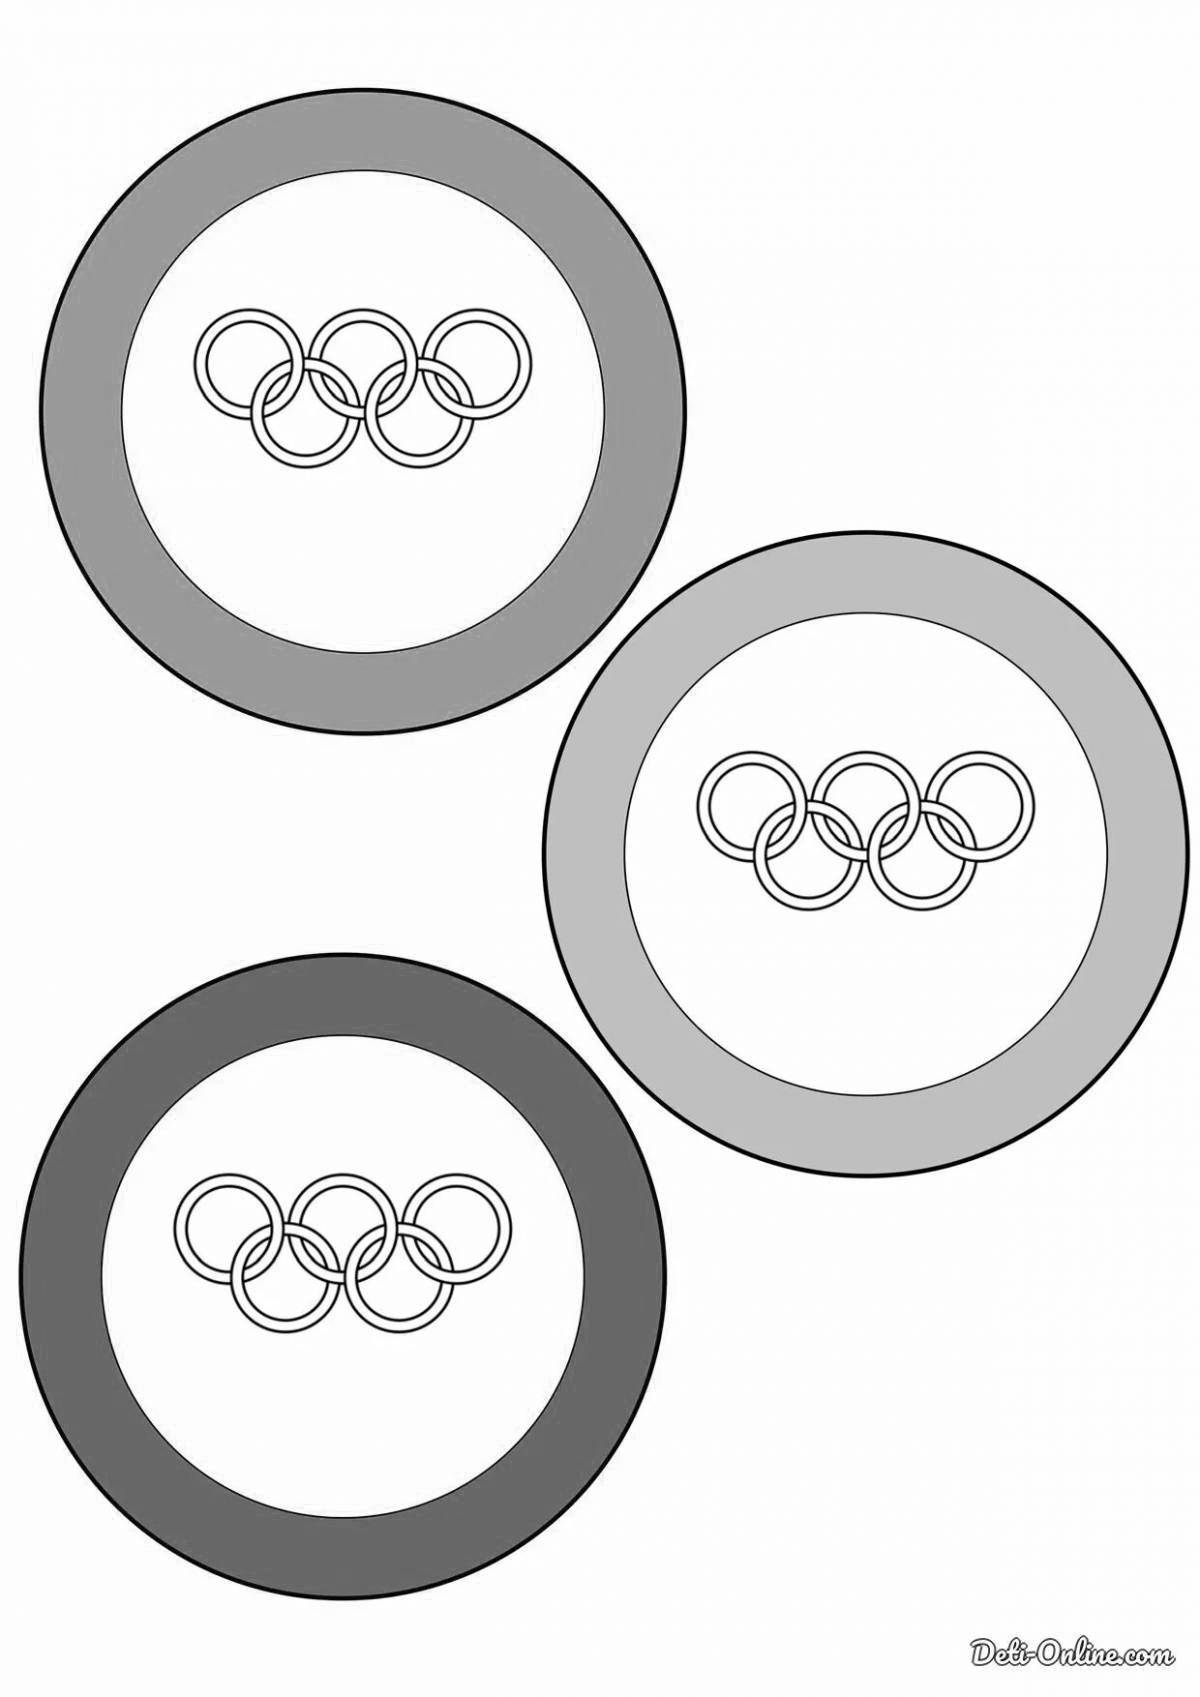 Coloring page glorious rings of the olympic games